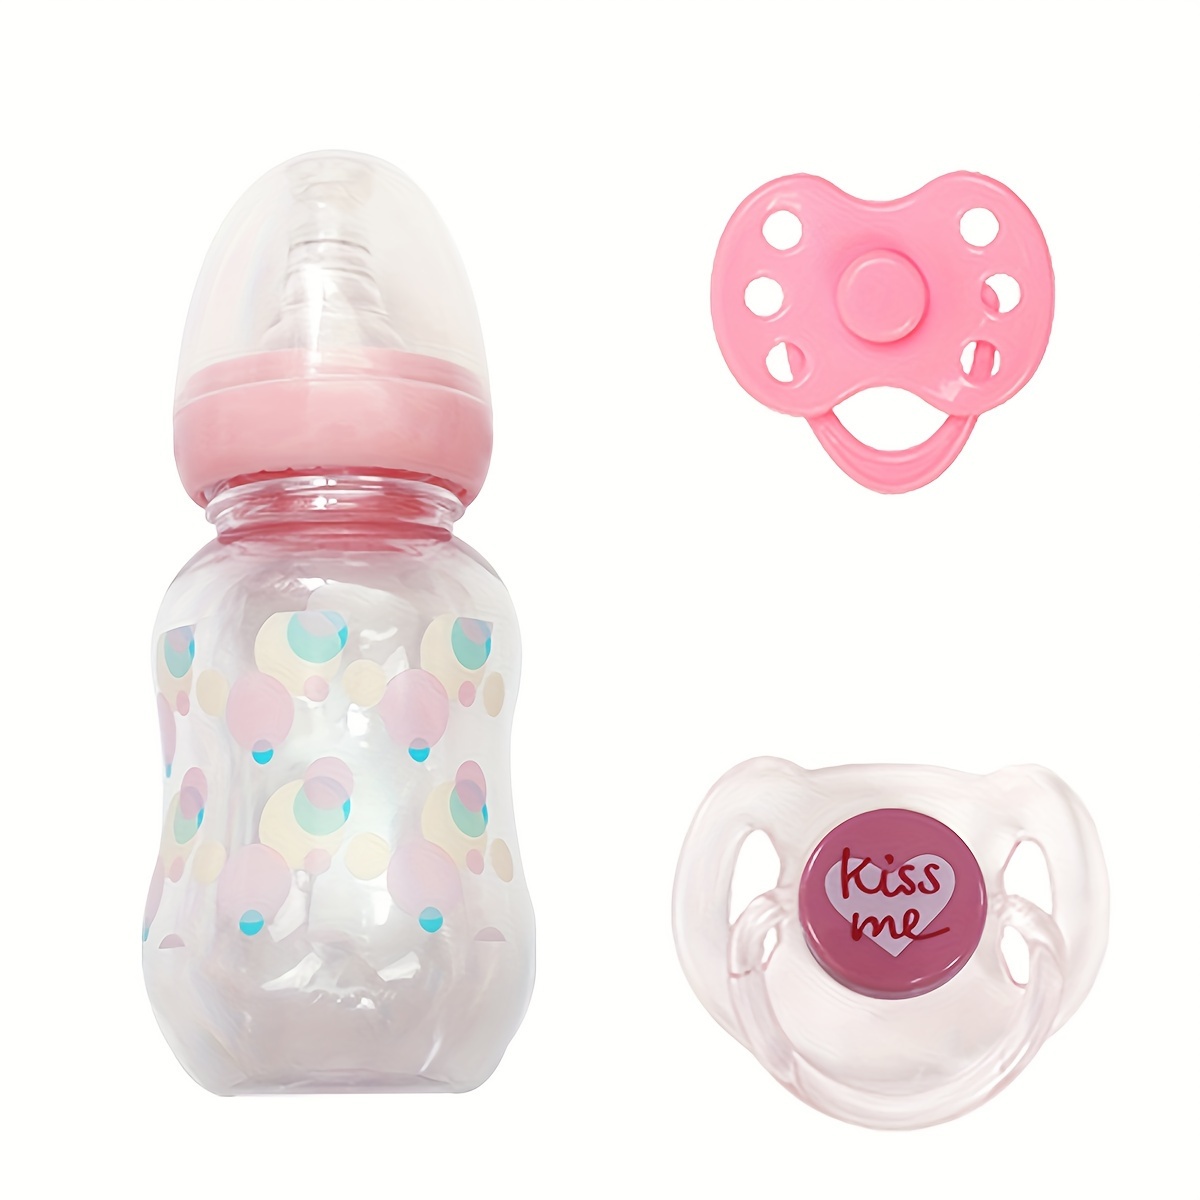 

3pcs/set Reborn Doll Accessories Fake Feeding Bottle Sealed Matching Putty Magnetic Pacifier Set Girl Pretend Play Feeding Toy Gift (pink)